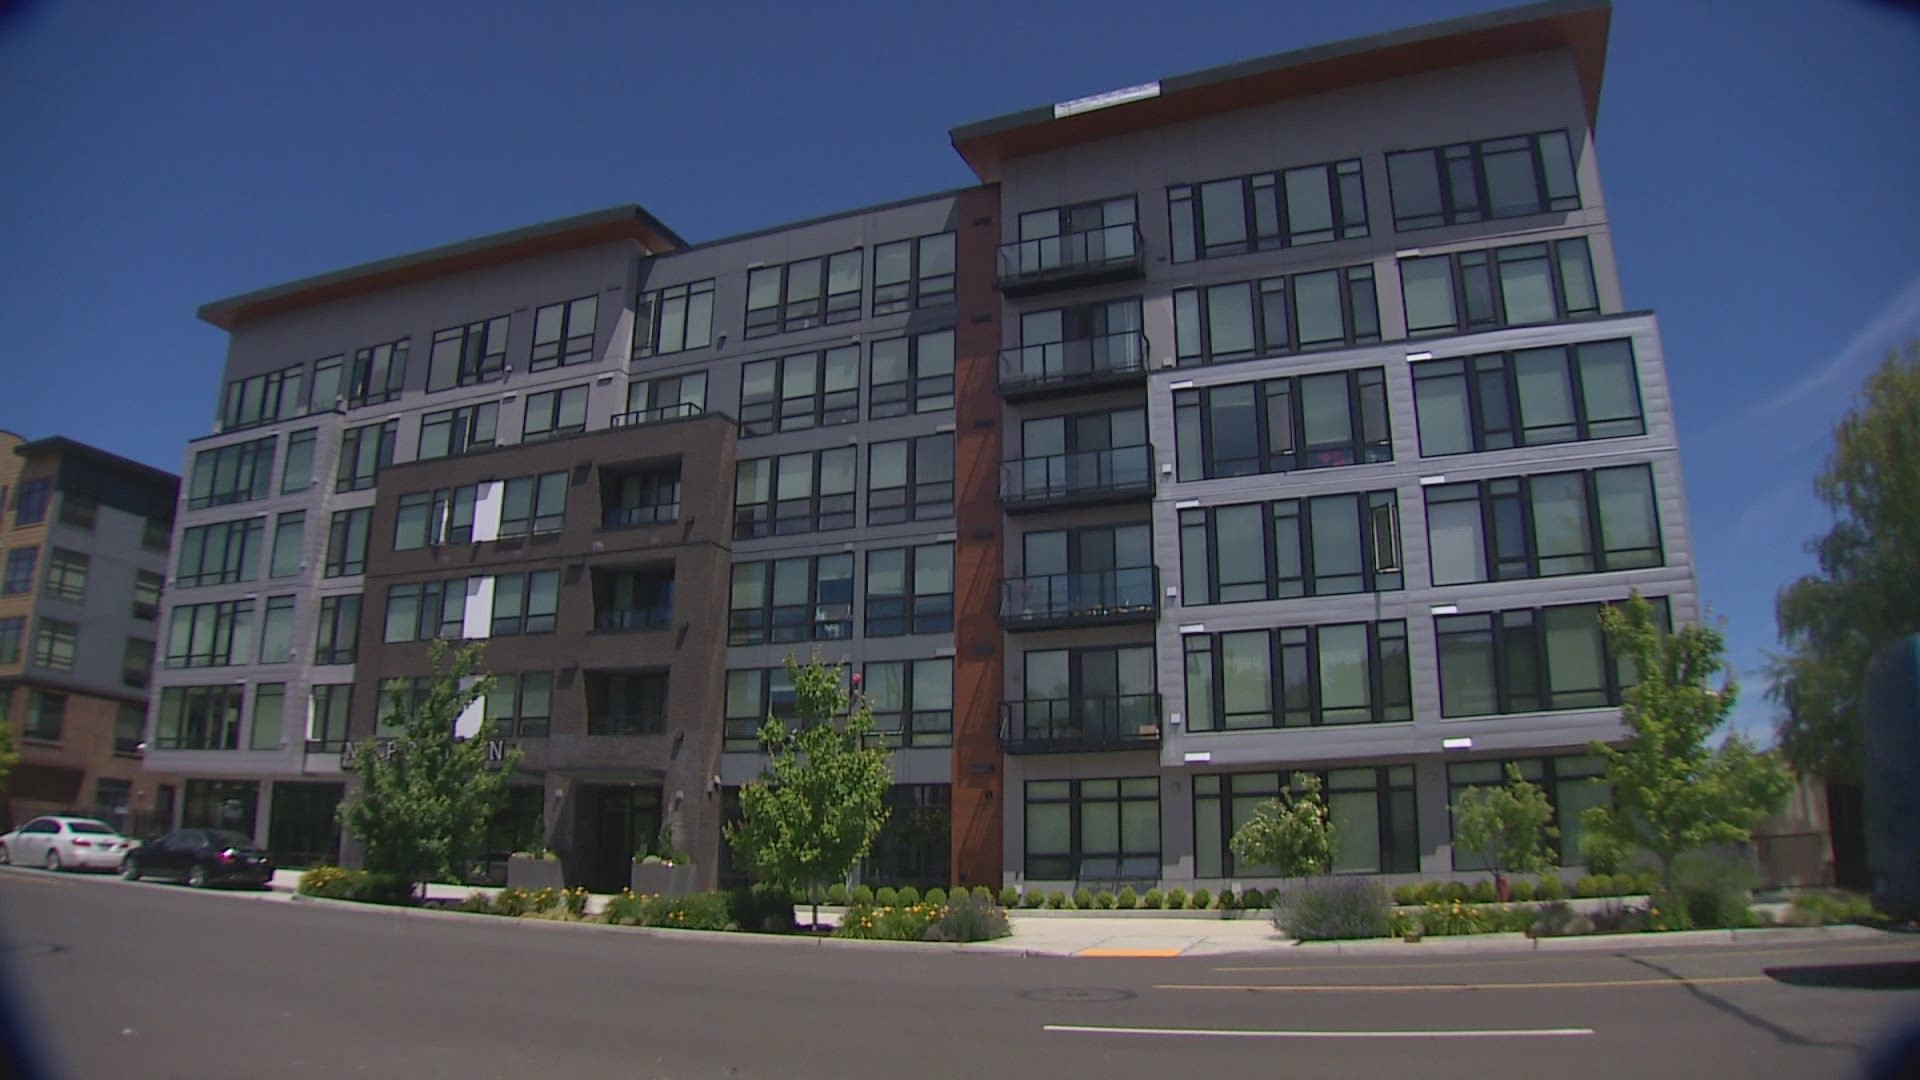 The eviction moratorium is set to expire on June 30, but Gov. Jay Inslee said the state needs time for rental services to catch up.